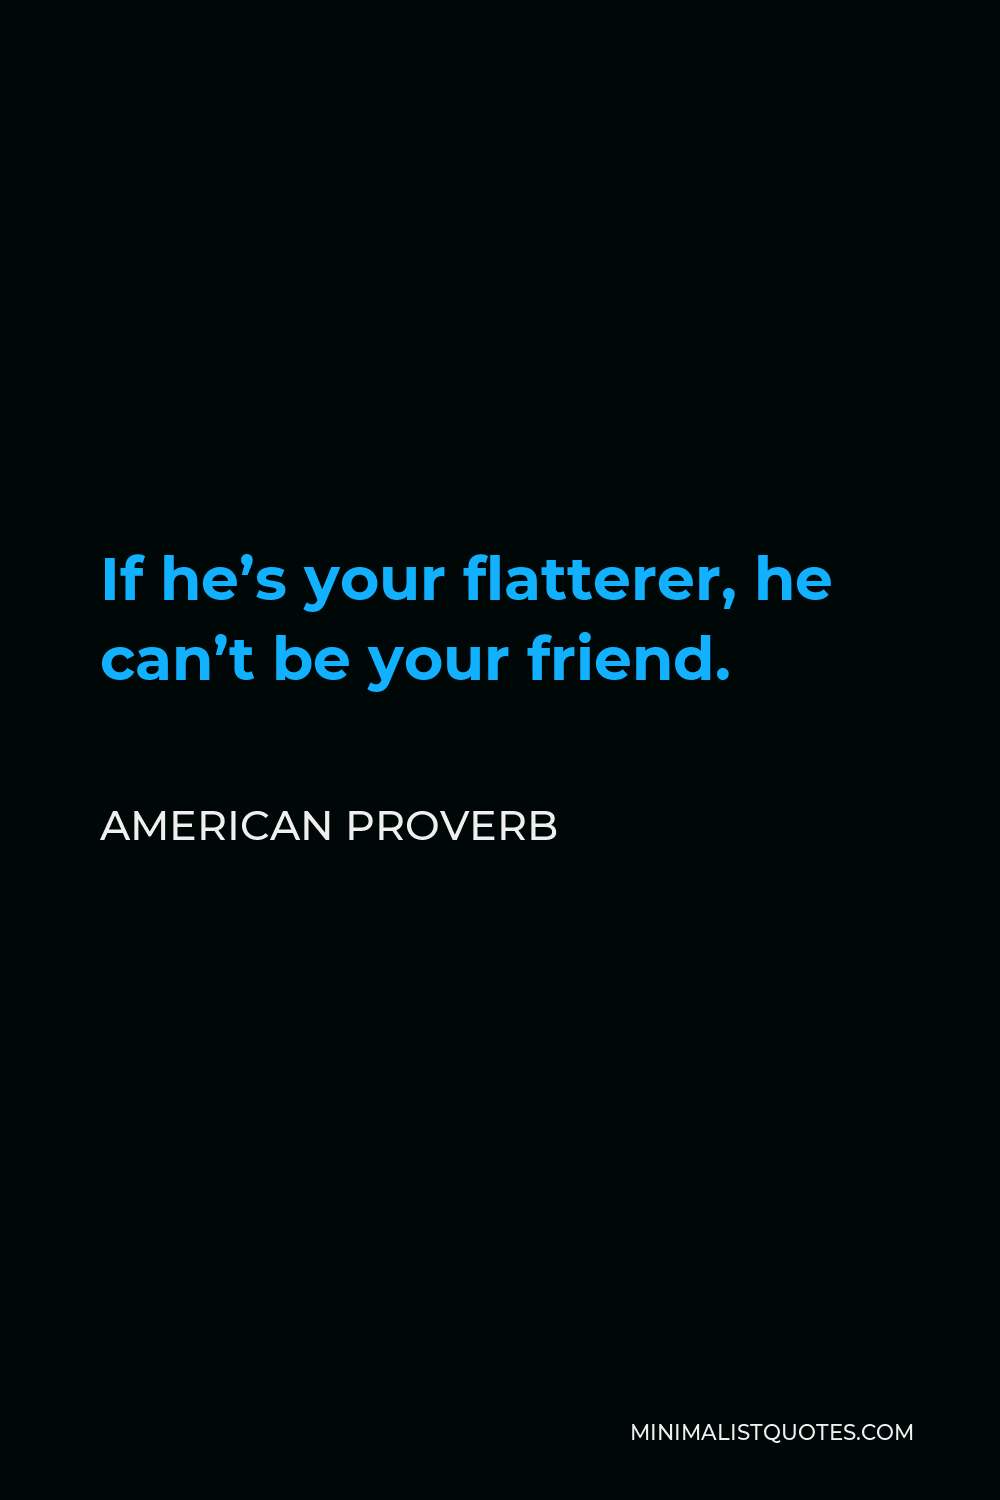 American Proverb Quote - If he’s your flatterer, he can’t be your friend.